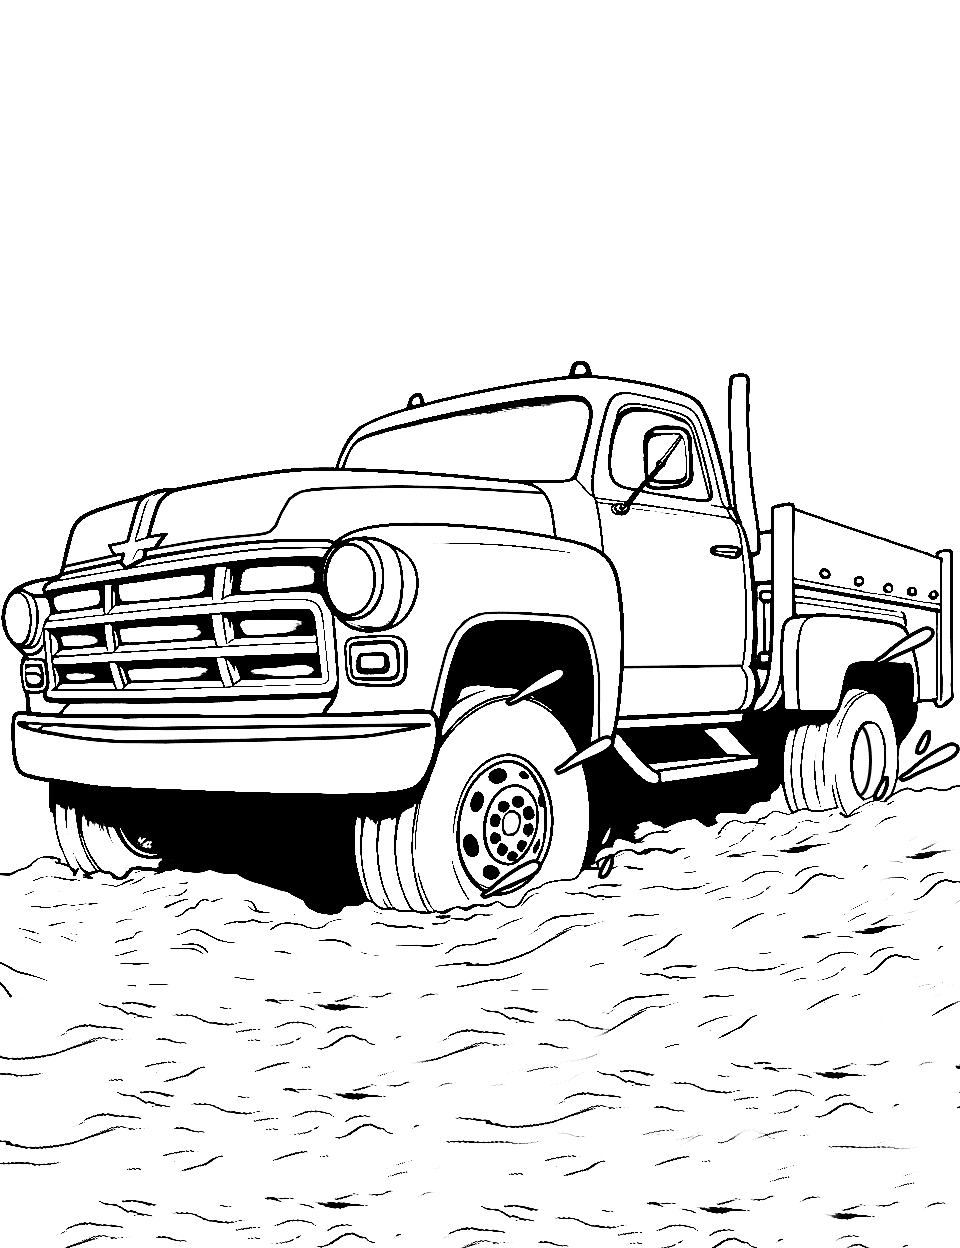 Chevy in the Mud Coloring Page - A Chevy truck splashing through a muddy puddle, with mud flying around.